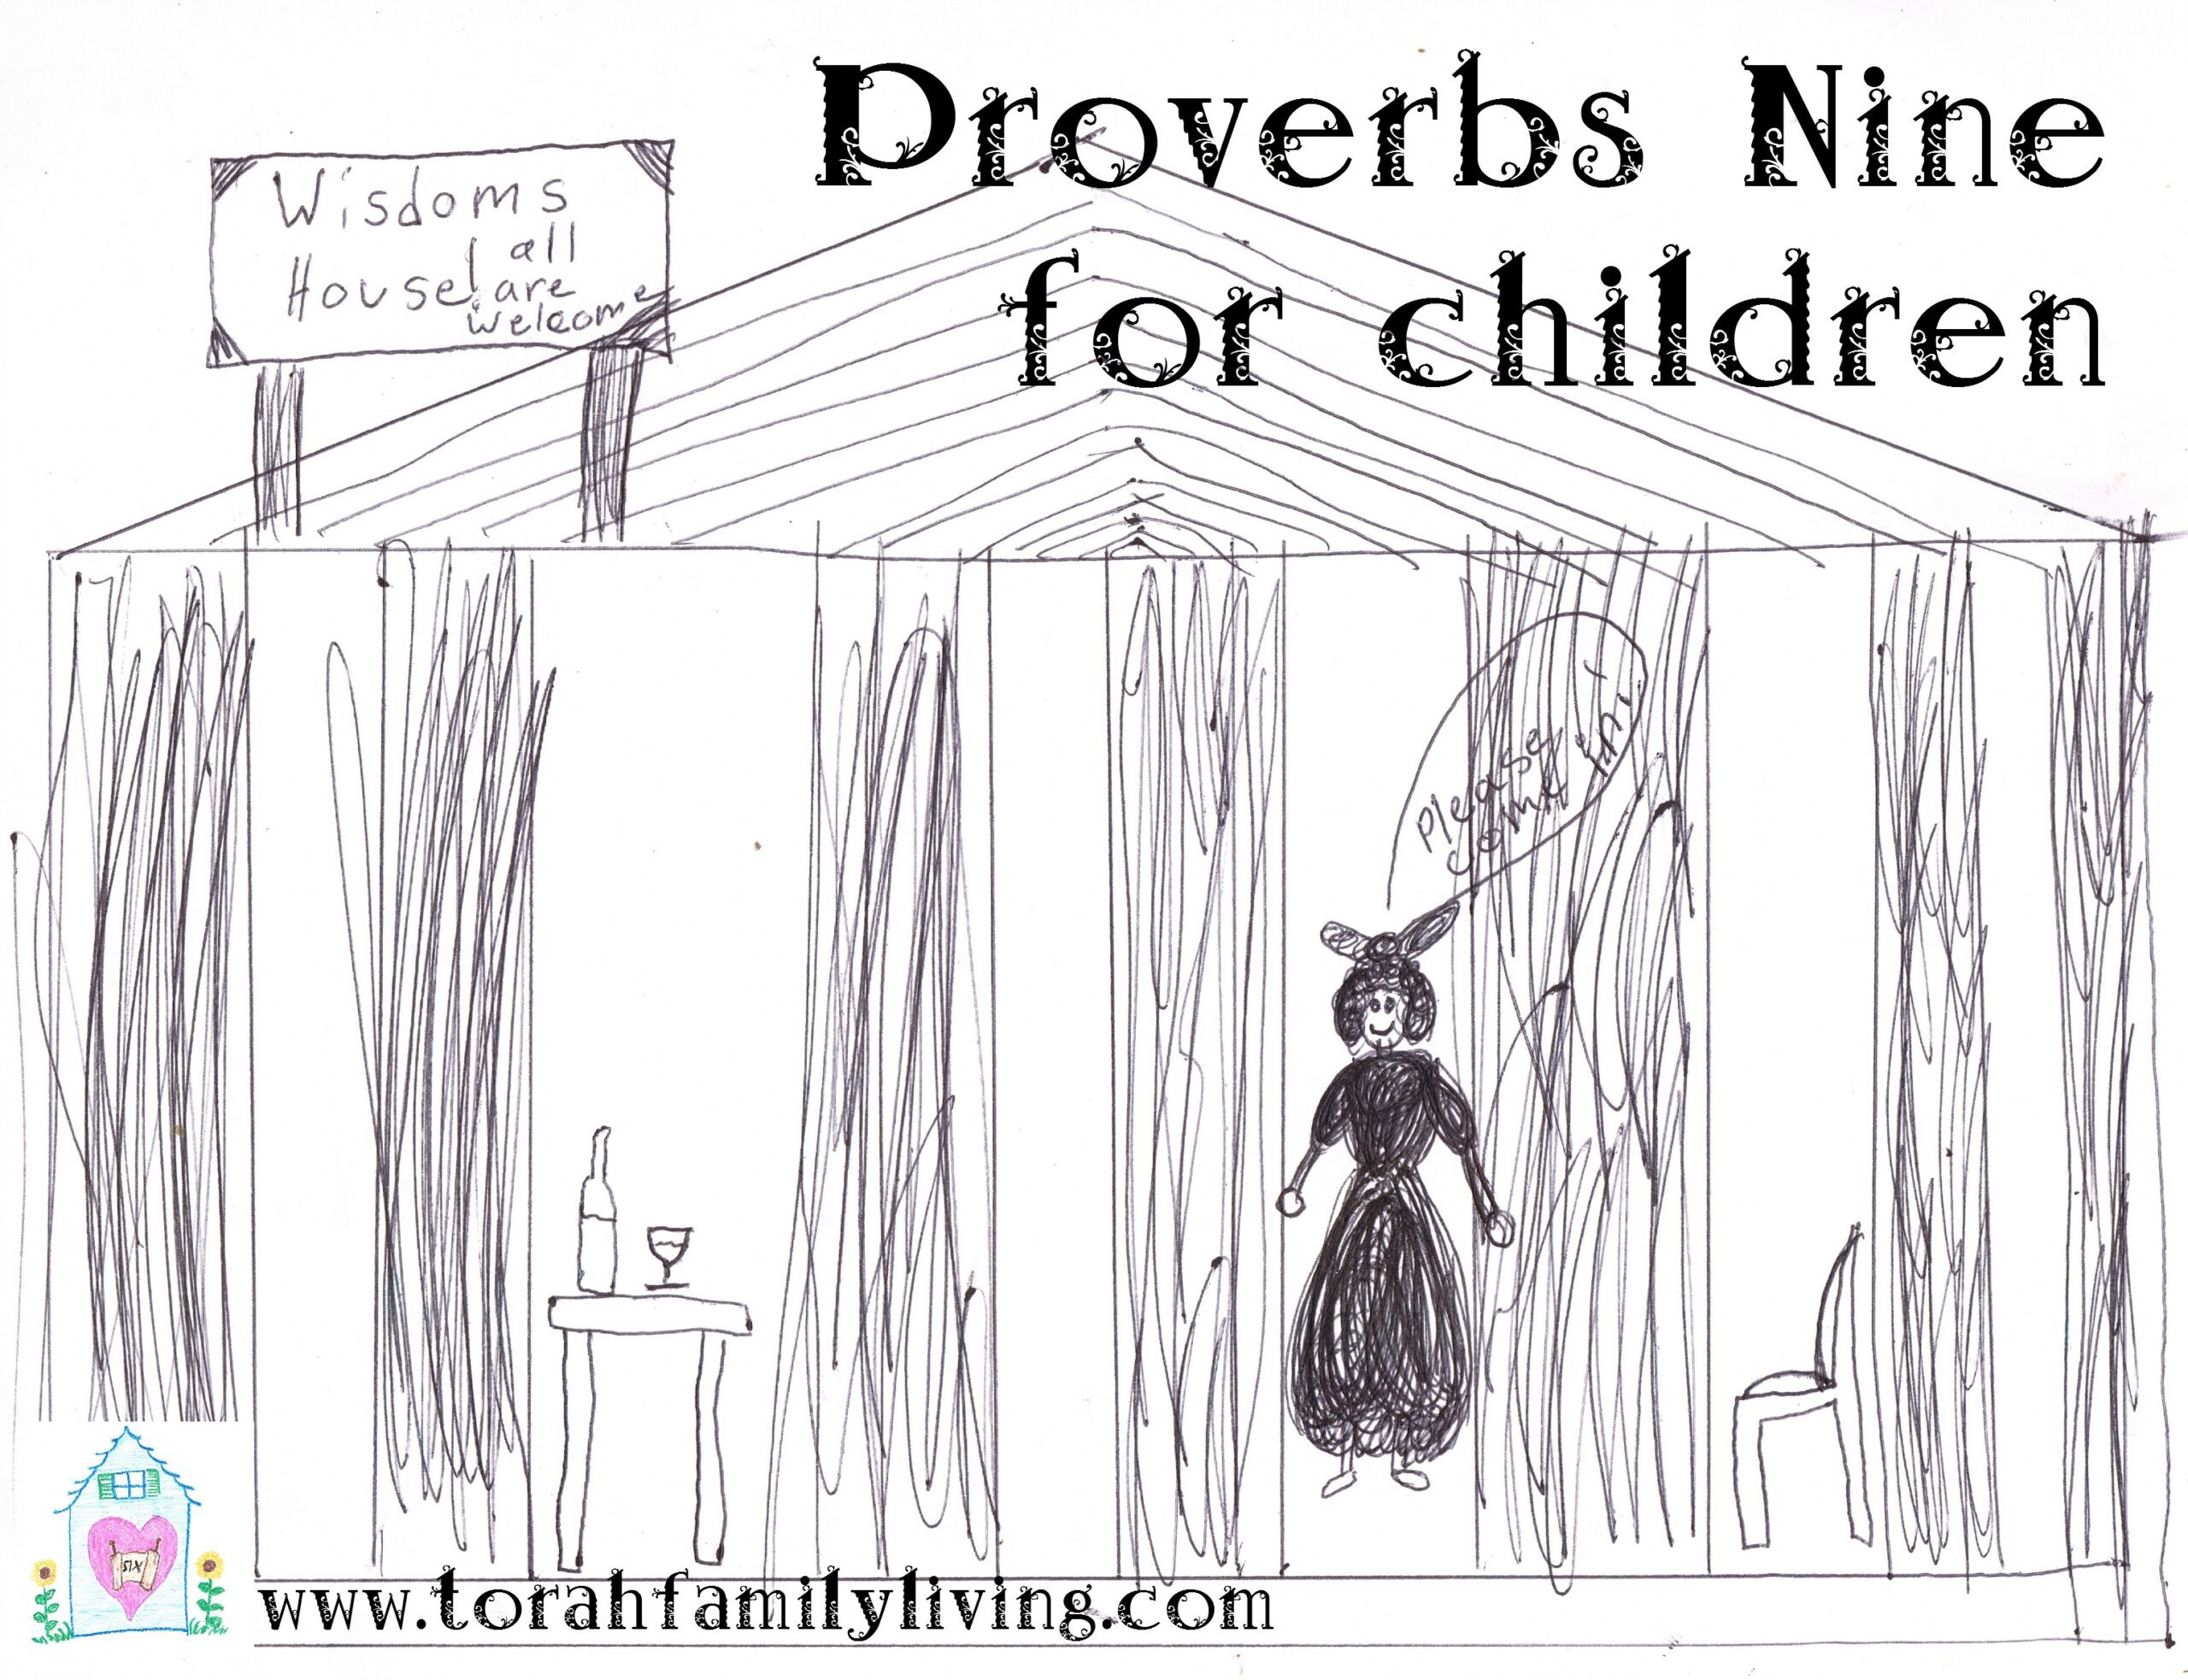 Proverbs 9 for children